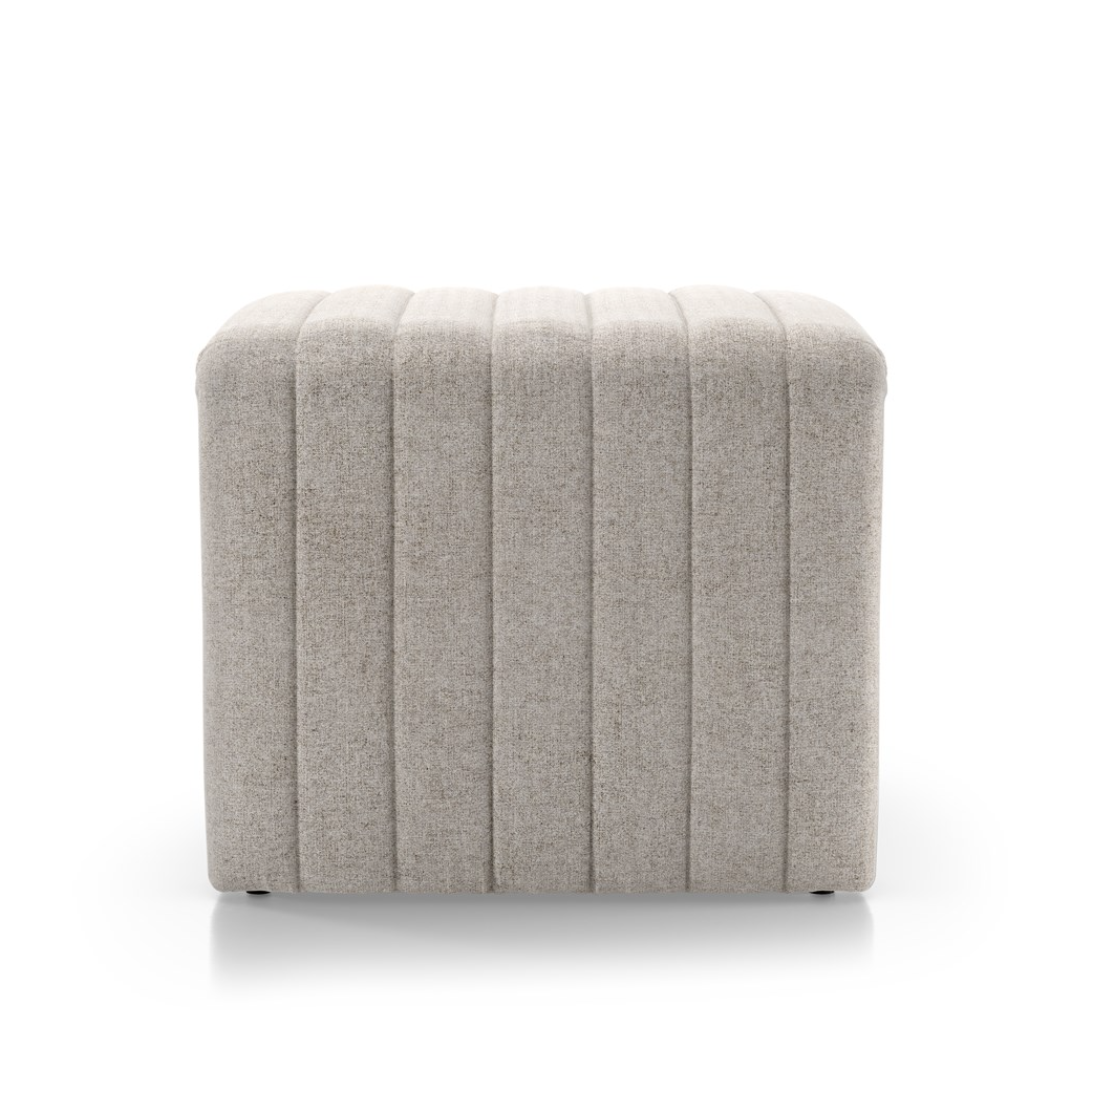 Augustine Orly Natural Ottoman